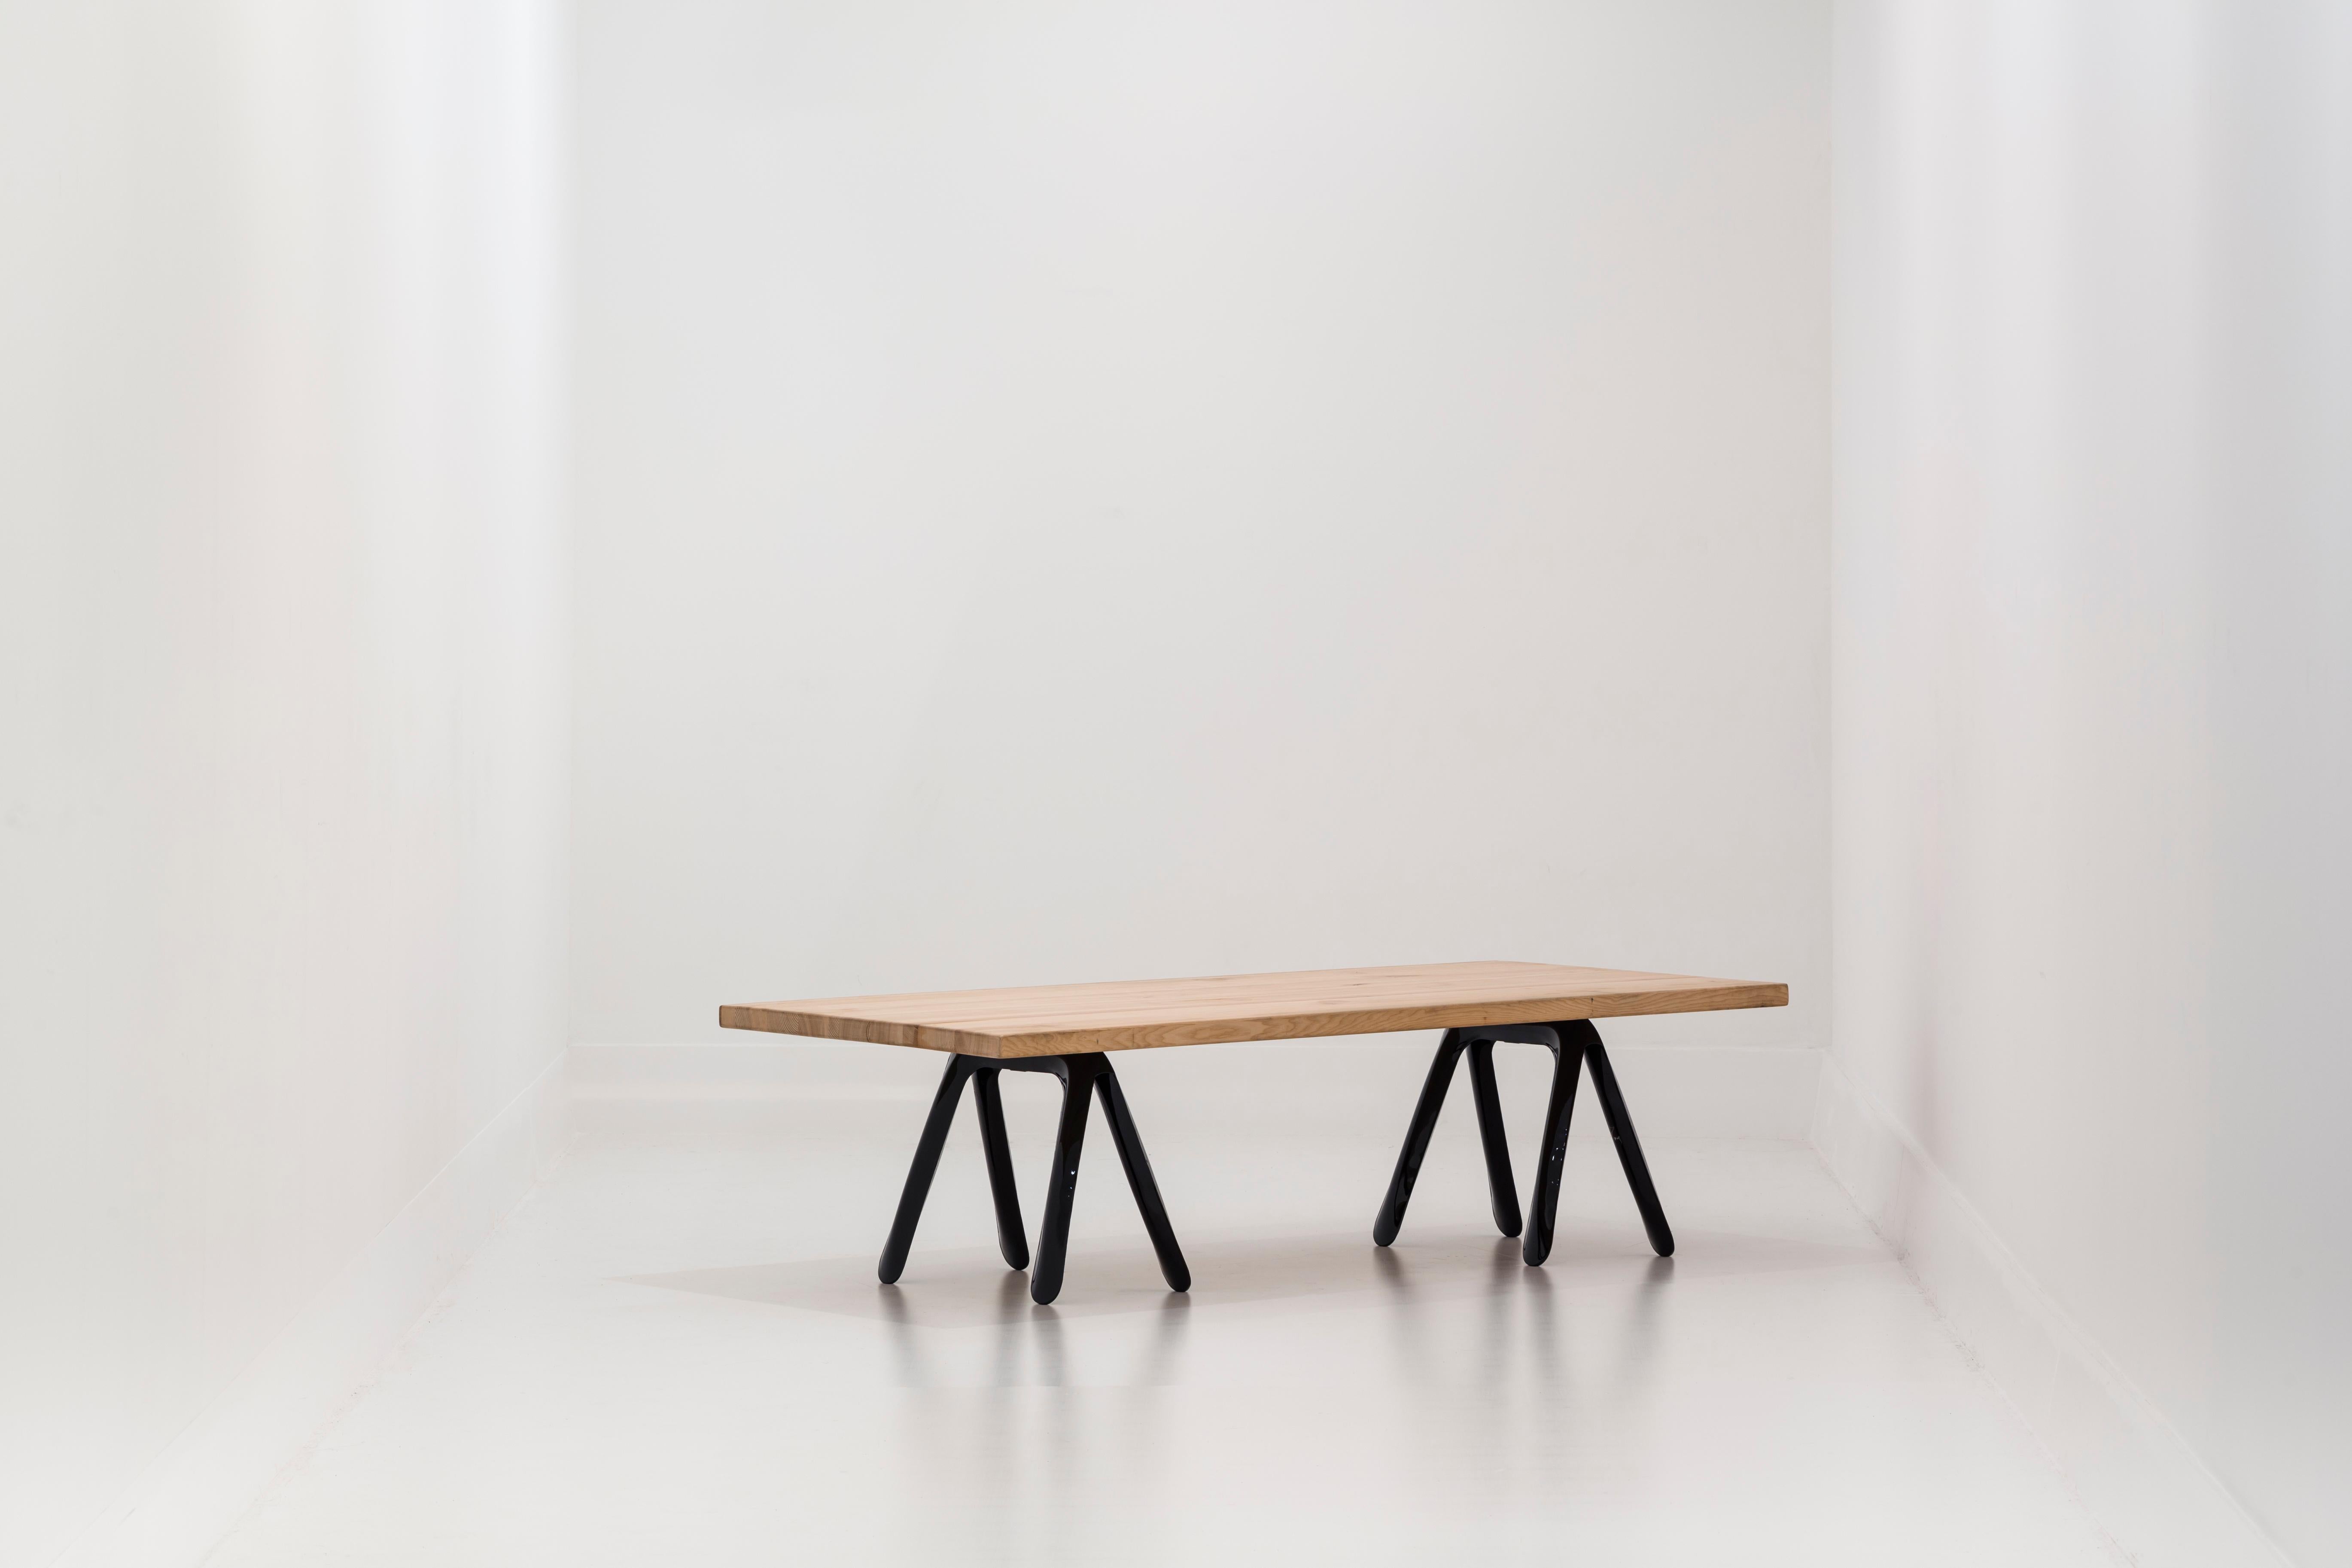 Kozka is our new member of table structures. It is a multitasking construction. According to different table tops, it could be used either as a coffee table or even as a part of unique bench.
Raw lacquer steel version products are designed to have